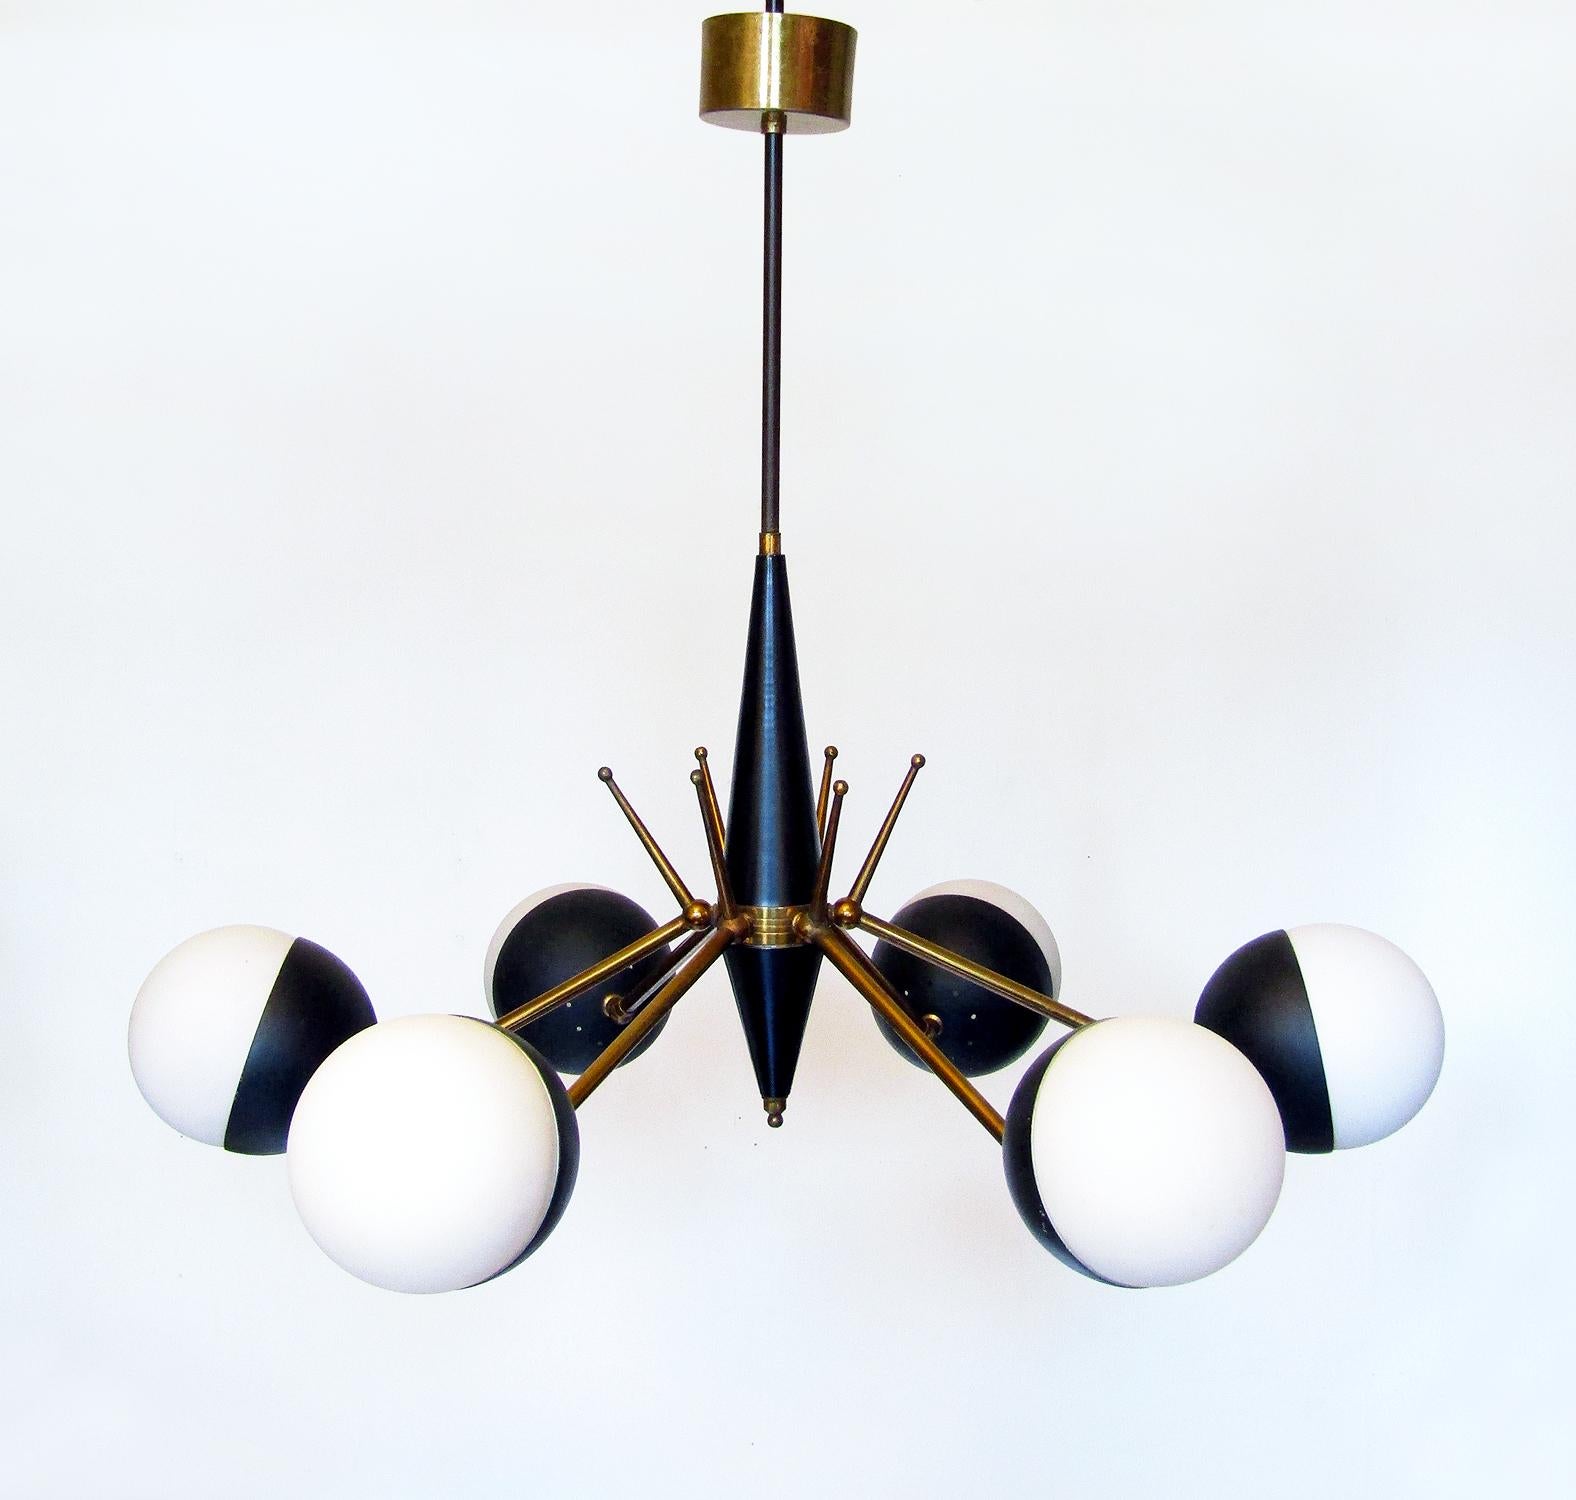 1950s Italian Articulated Globe Chandelier Attributed to Stilnovo In Good Condition For Sale In Shepperton, Surrey